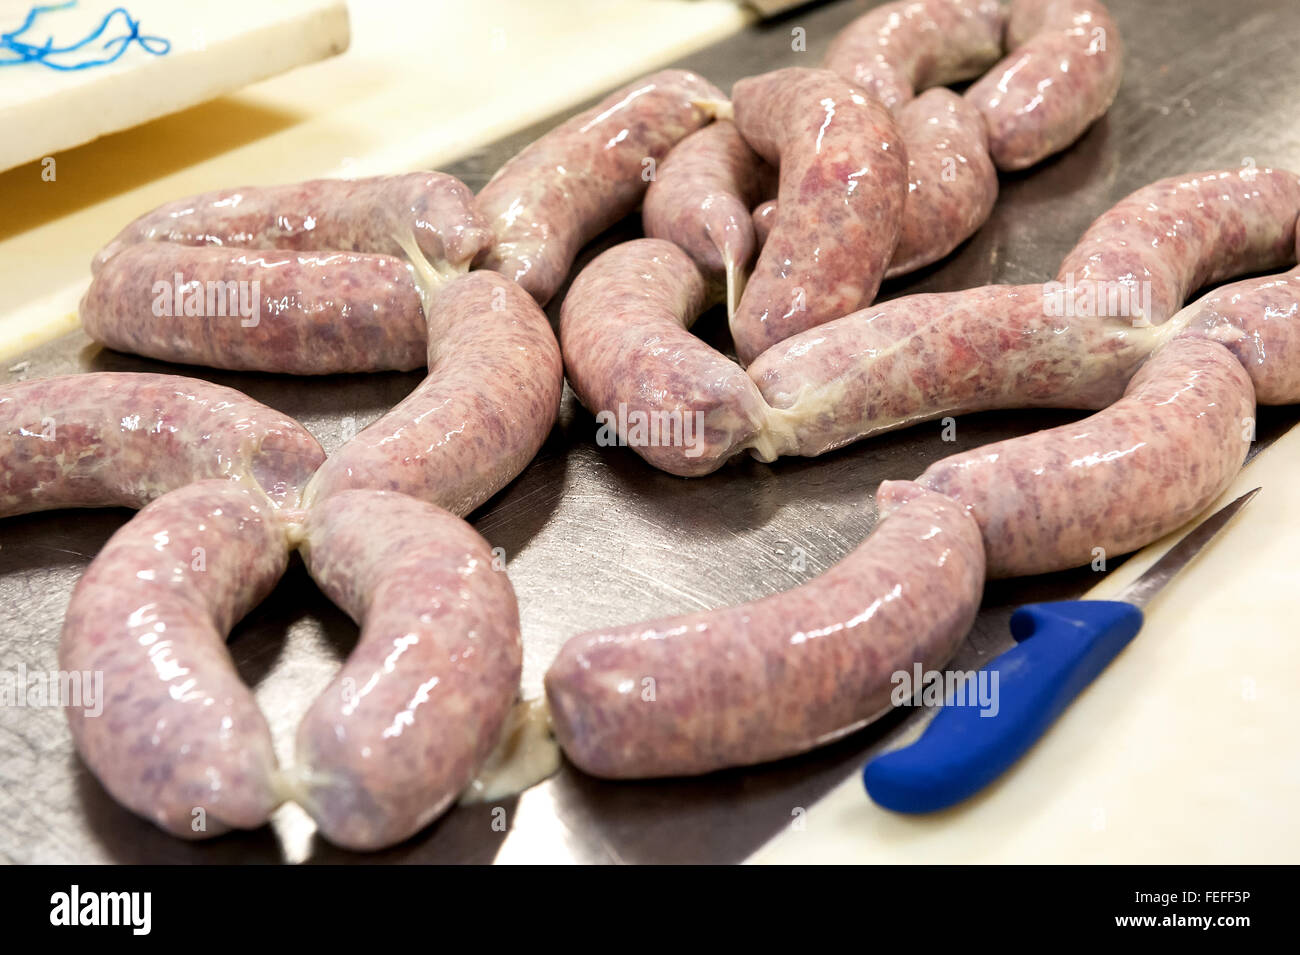 Tray of fresh Italian salami sausage filled with a spicy mixture of pork and beef ready for aging and drying in a butchery Stock Photo